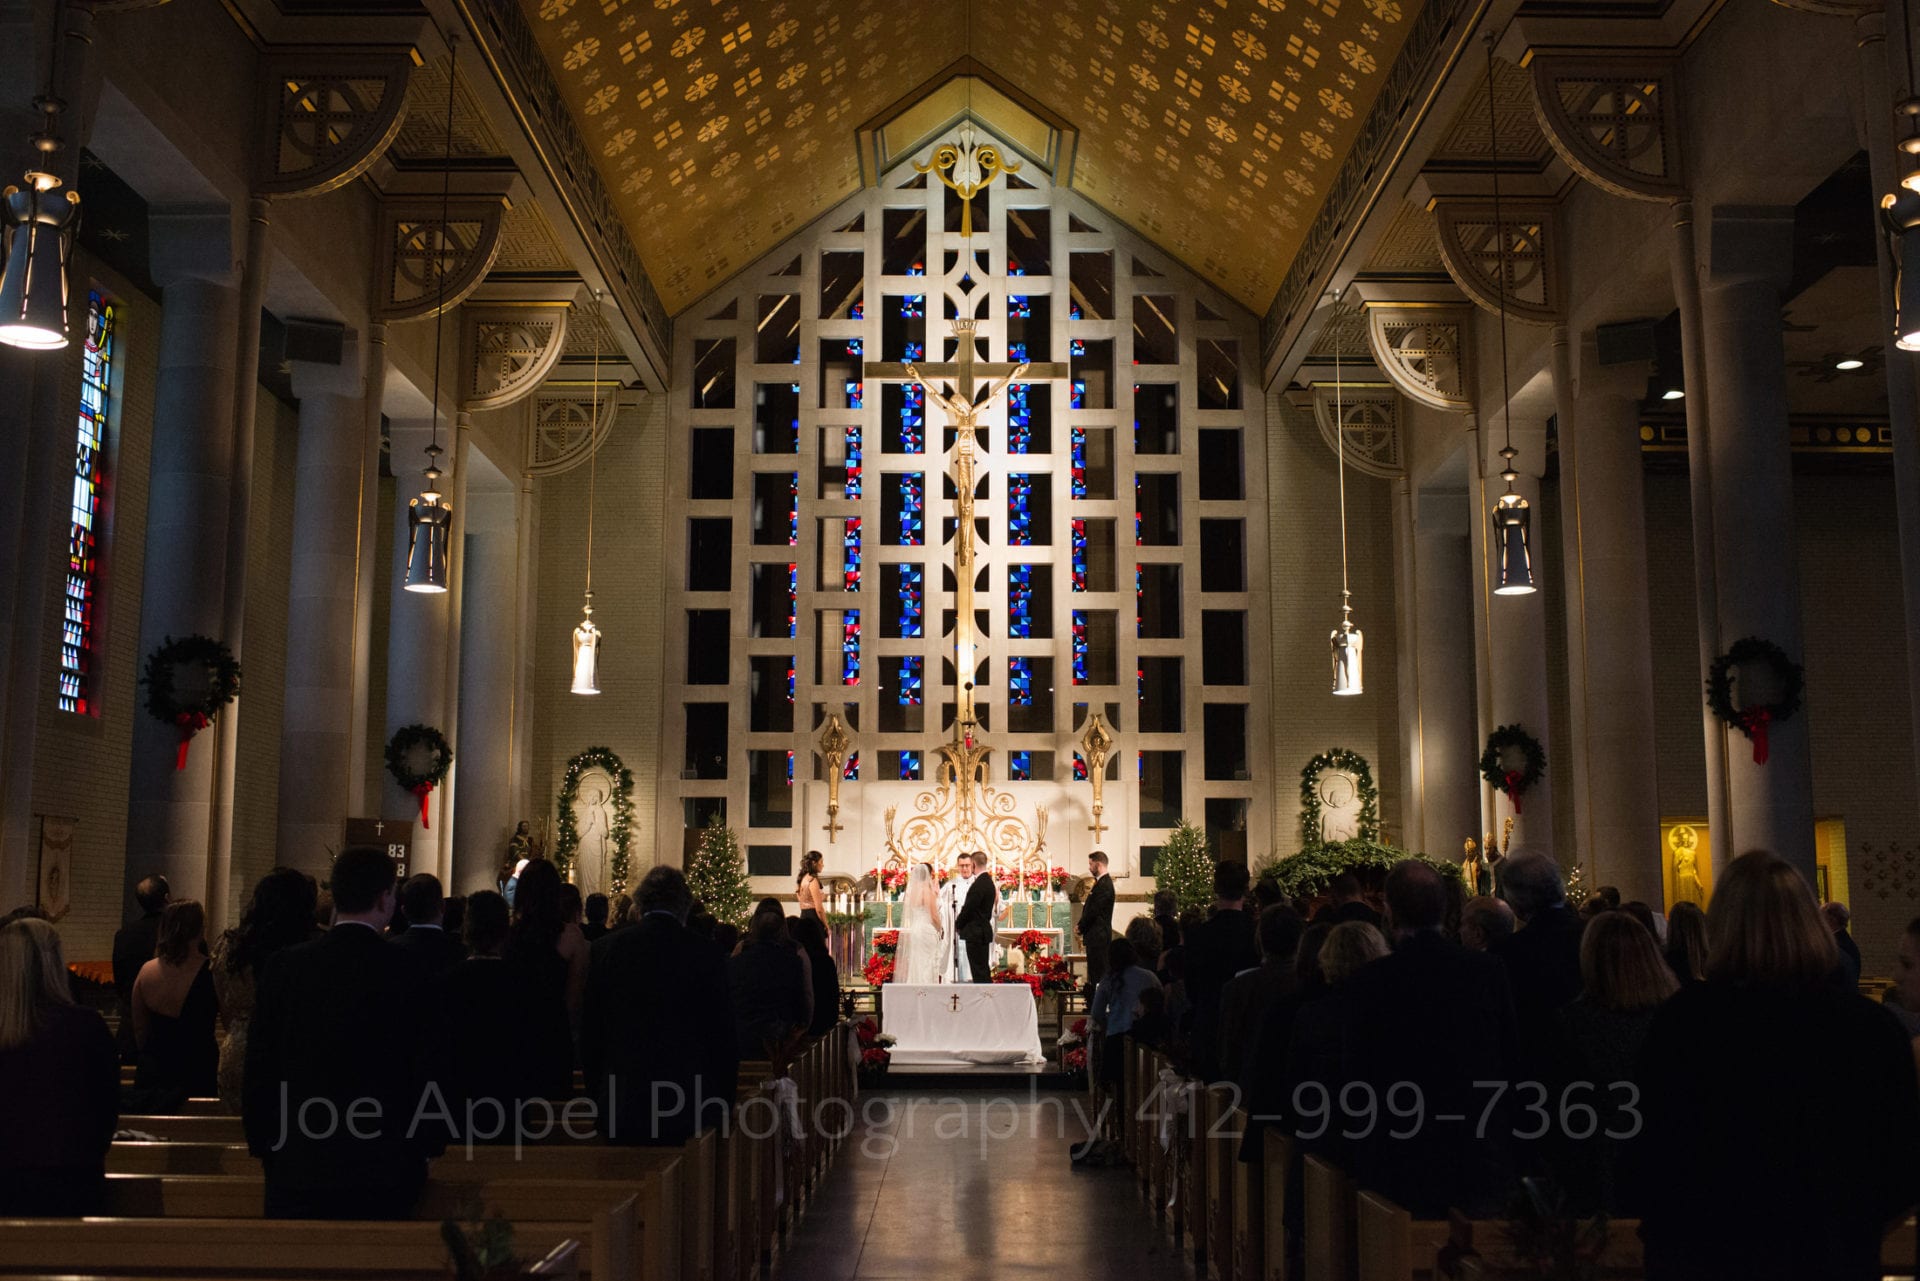 The interior of St. Raphael parish in Stanton Heights with a bride and groom standing in the center as they exchange vows.